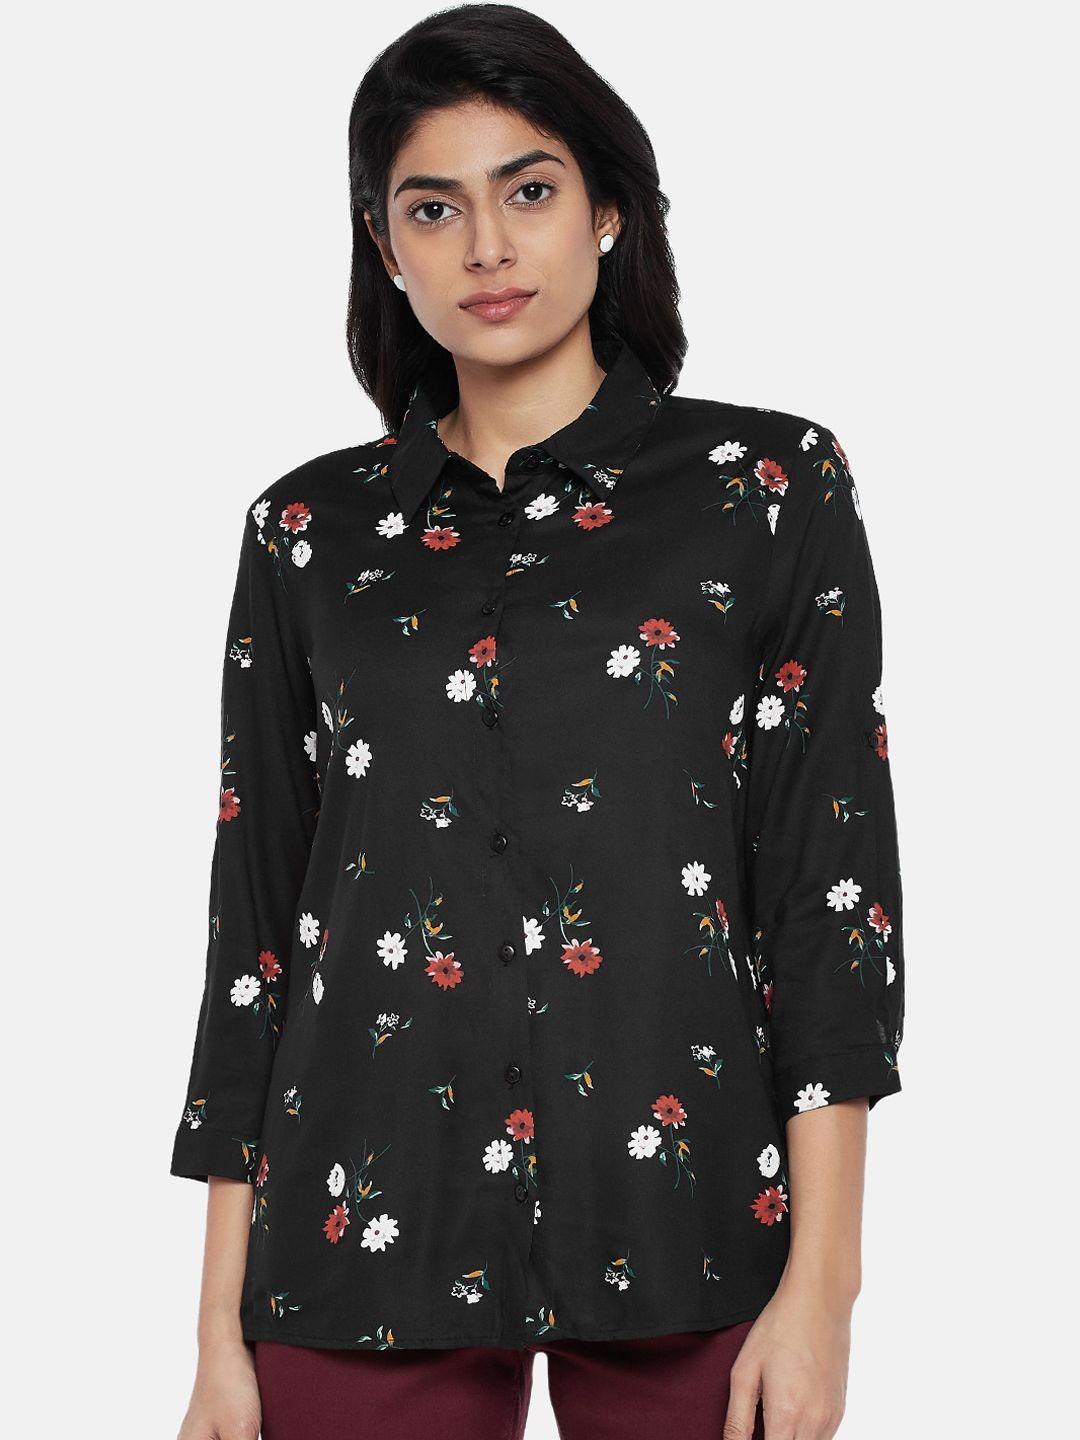 honey by pantaloons women black & off-white floral printed casual shirt